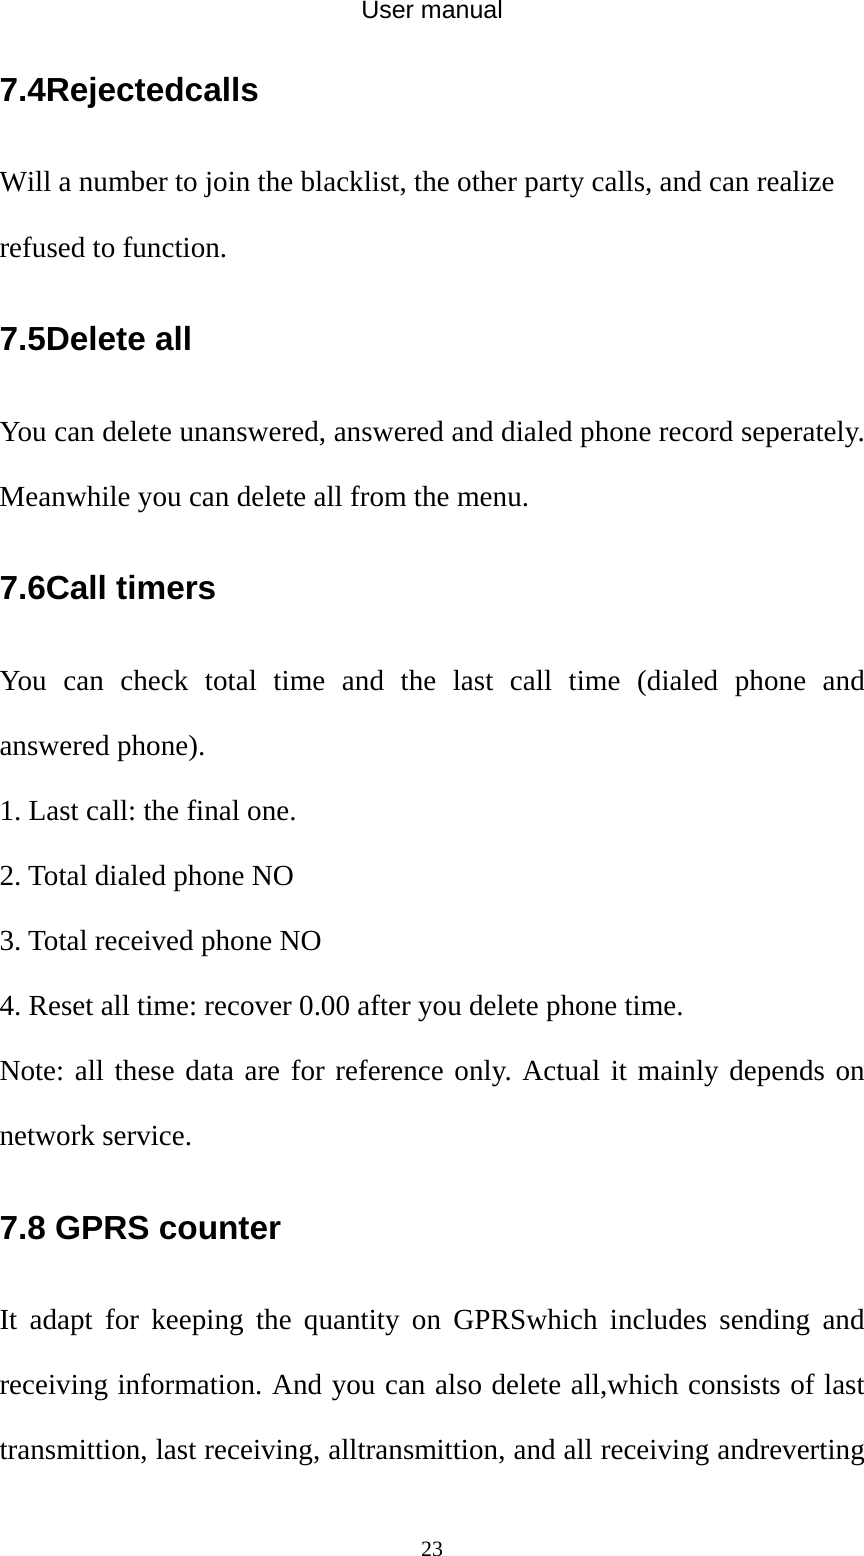 User manual  237.4Rejectedcalls Will a number to join the blacklist, the other party calls, and can realize refused to function. 7.5Delete all You can delete unanswered, answered and dialed phone record seperately. Meanwhile you can delete all from the menu. 7.6Call timers You can check total time and the last call time (dialed phone and answered phone). 1. Last call: the final one. 2. Total dialed phone NO 3. Total received phone NO 4. Reset all time: recover 0.00 after you delete phone time. Note: all these data are for reference only. Actual it mainly depends on network service. 7.8 GPRS counter It adapt for keeping the quantity on GPRSwhich includes sending and receiving information. And you can also delete all,which consists of last transmittion, last receiving, alltransmittion, and all receiving andreverting 